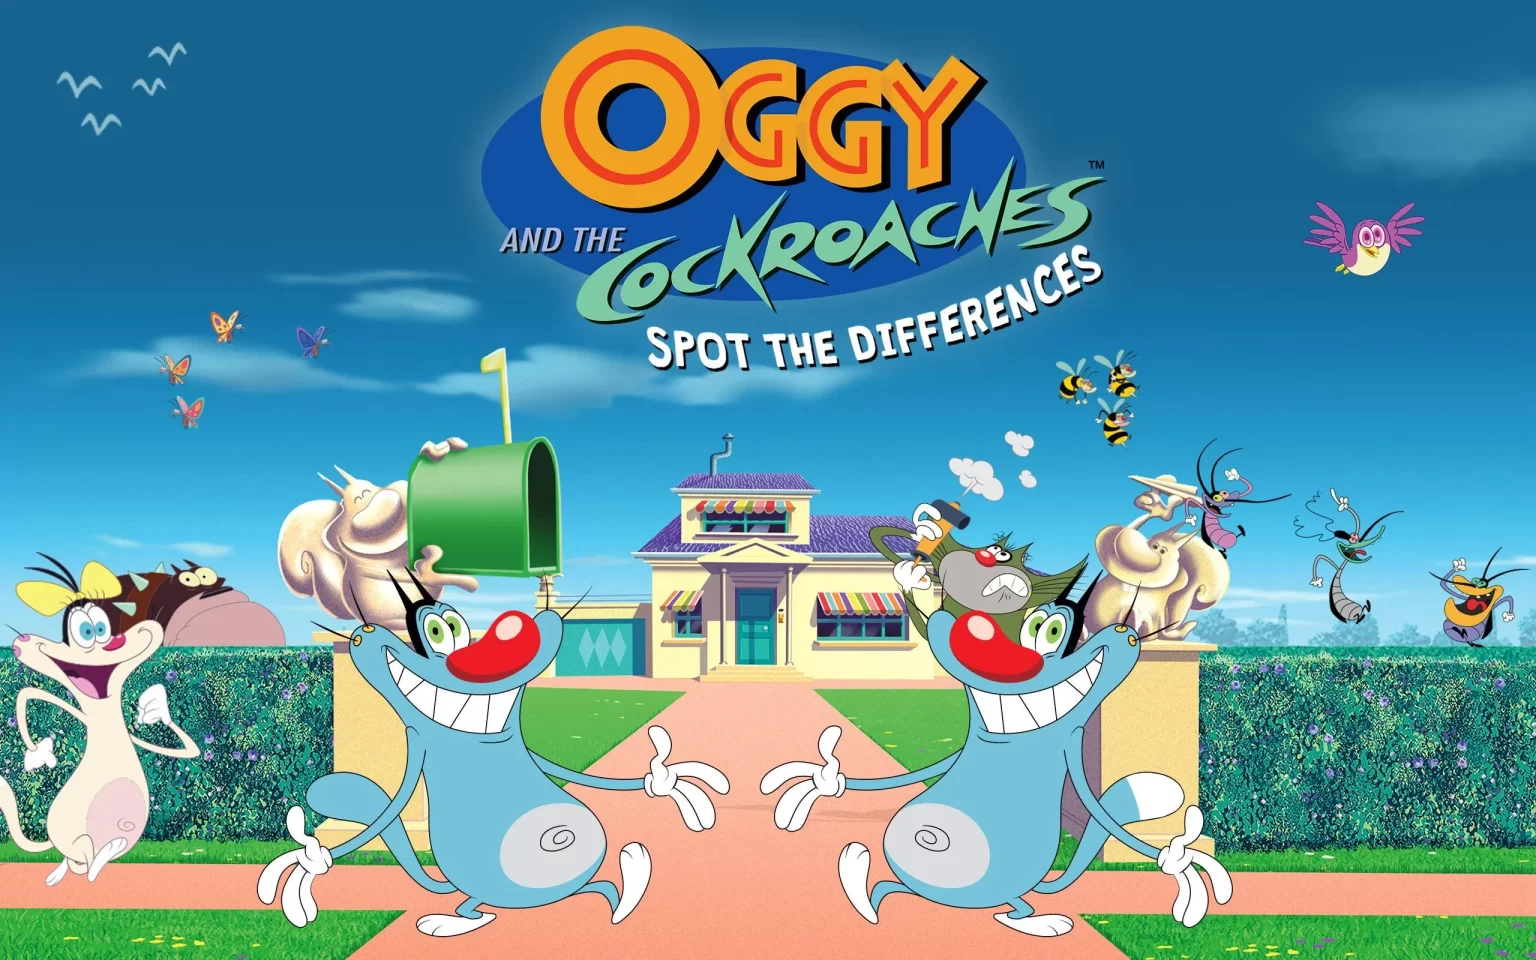 unnamed 14 1536x960 - Oggy Mod Apk V1.3.5 (Unlimited Money) Latest Version